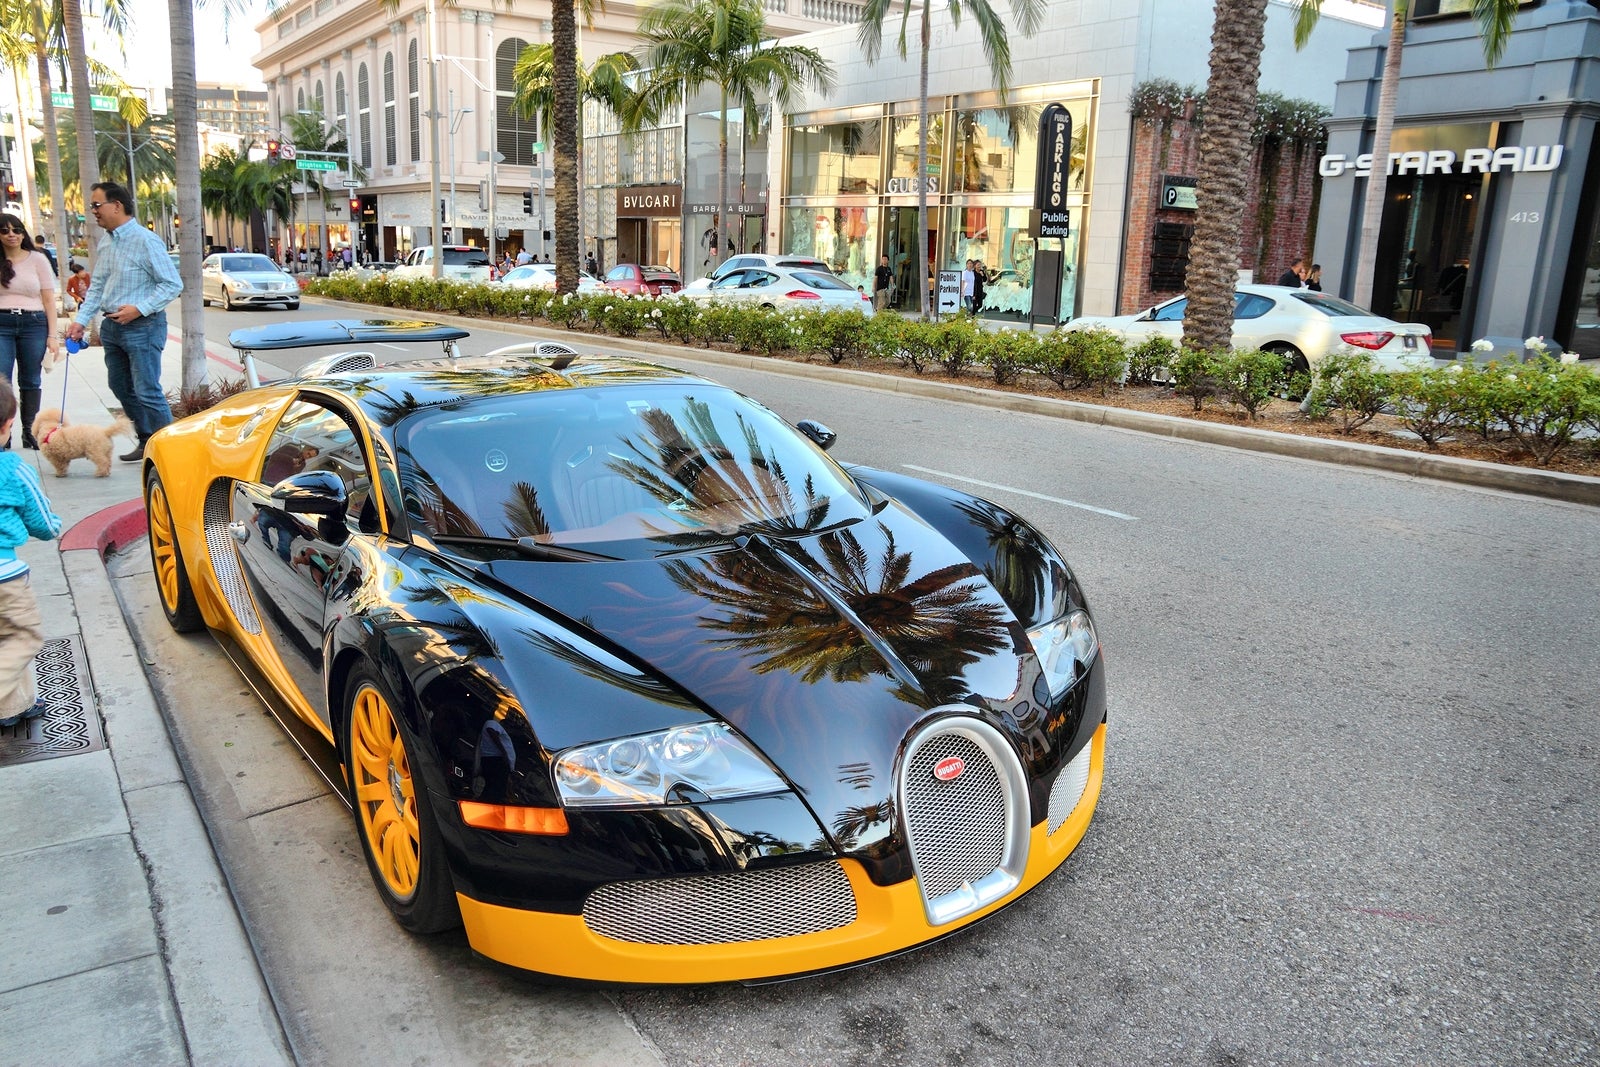 LOS ANGELES USA - APRIL 5 2014: People walk by Bugatti Veyron supercar parked in Beverly Hills Los Angeles. Beverly Hills is a district of upscale shopping and rich celebrities.